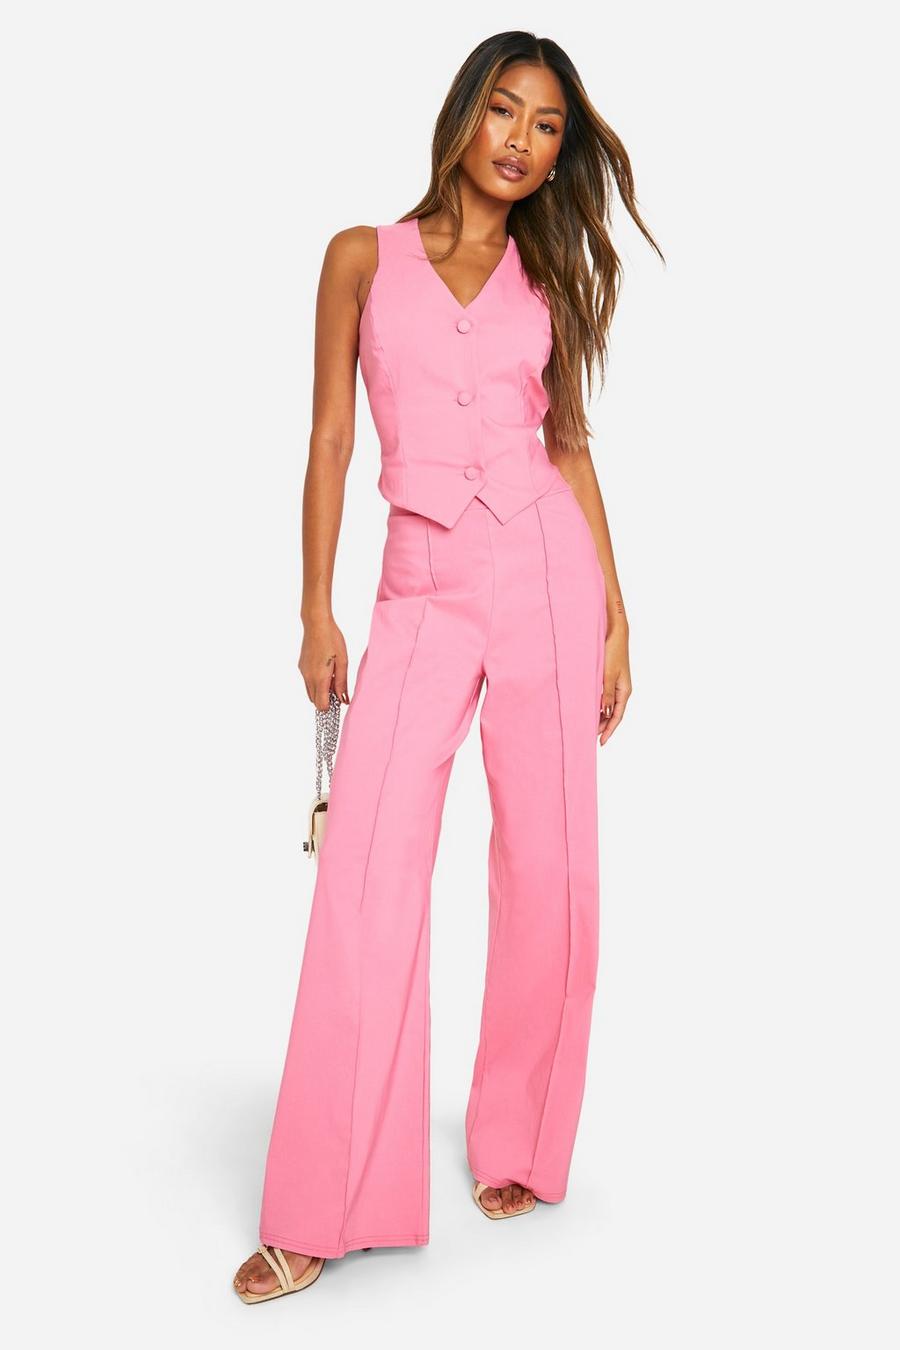 Candy pink Super Stretch Waistcoat & Seam Front Straight Leg Trousers